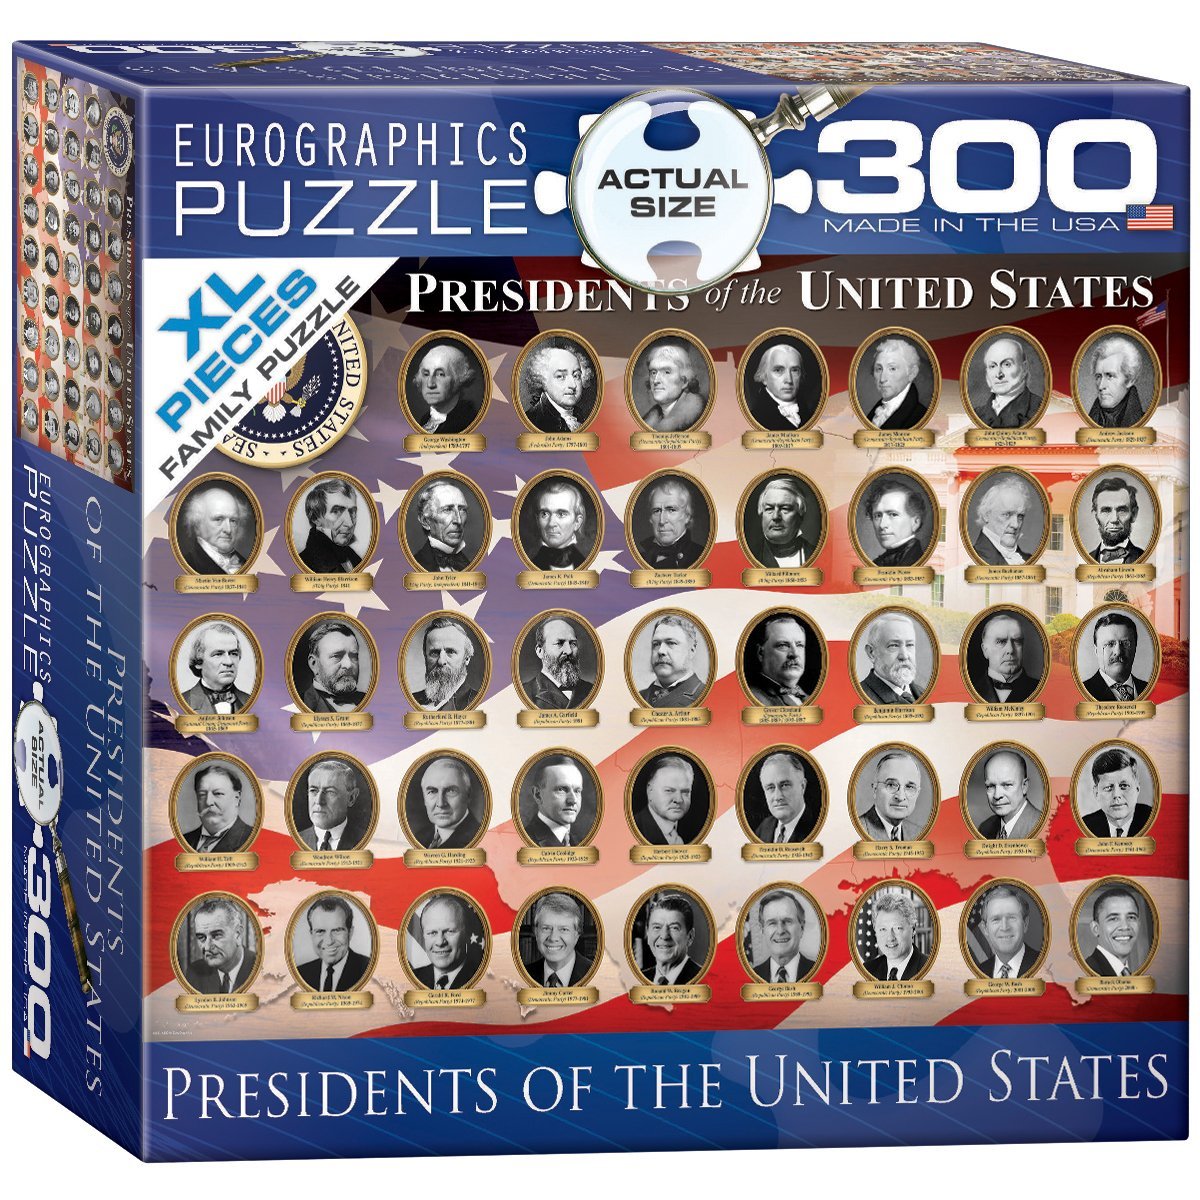 Eurographics 8300-1432 XXL Pieces - Presidents of the United States 300 Piece Jigsaw Puzzle